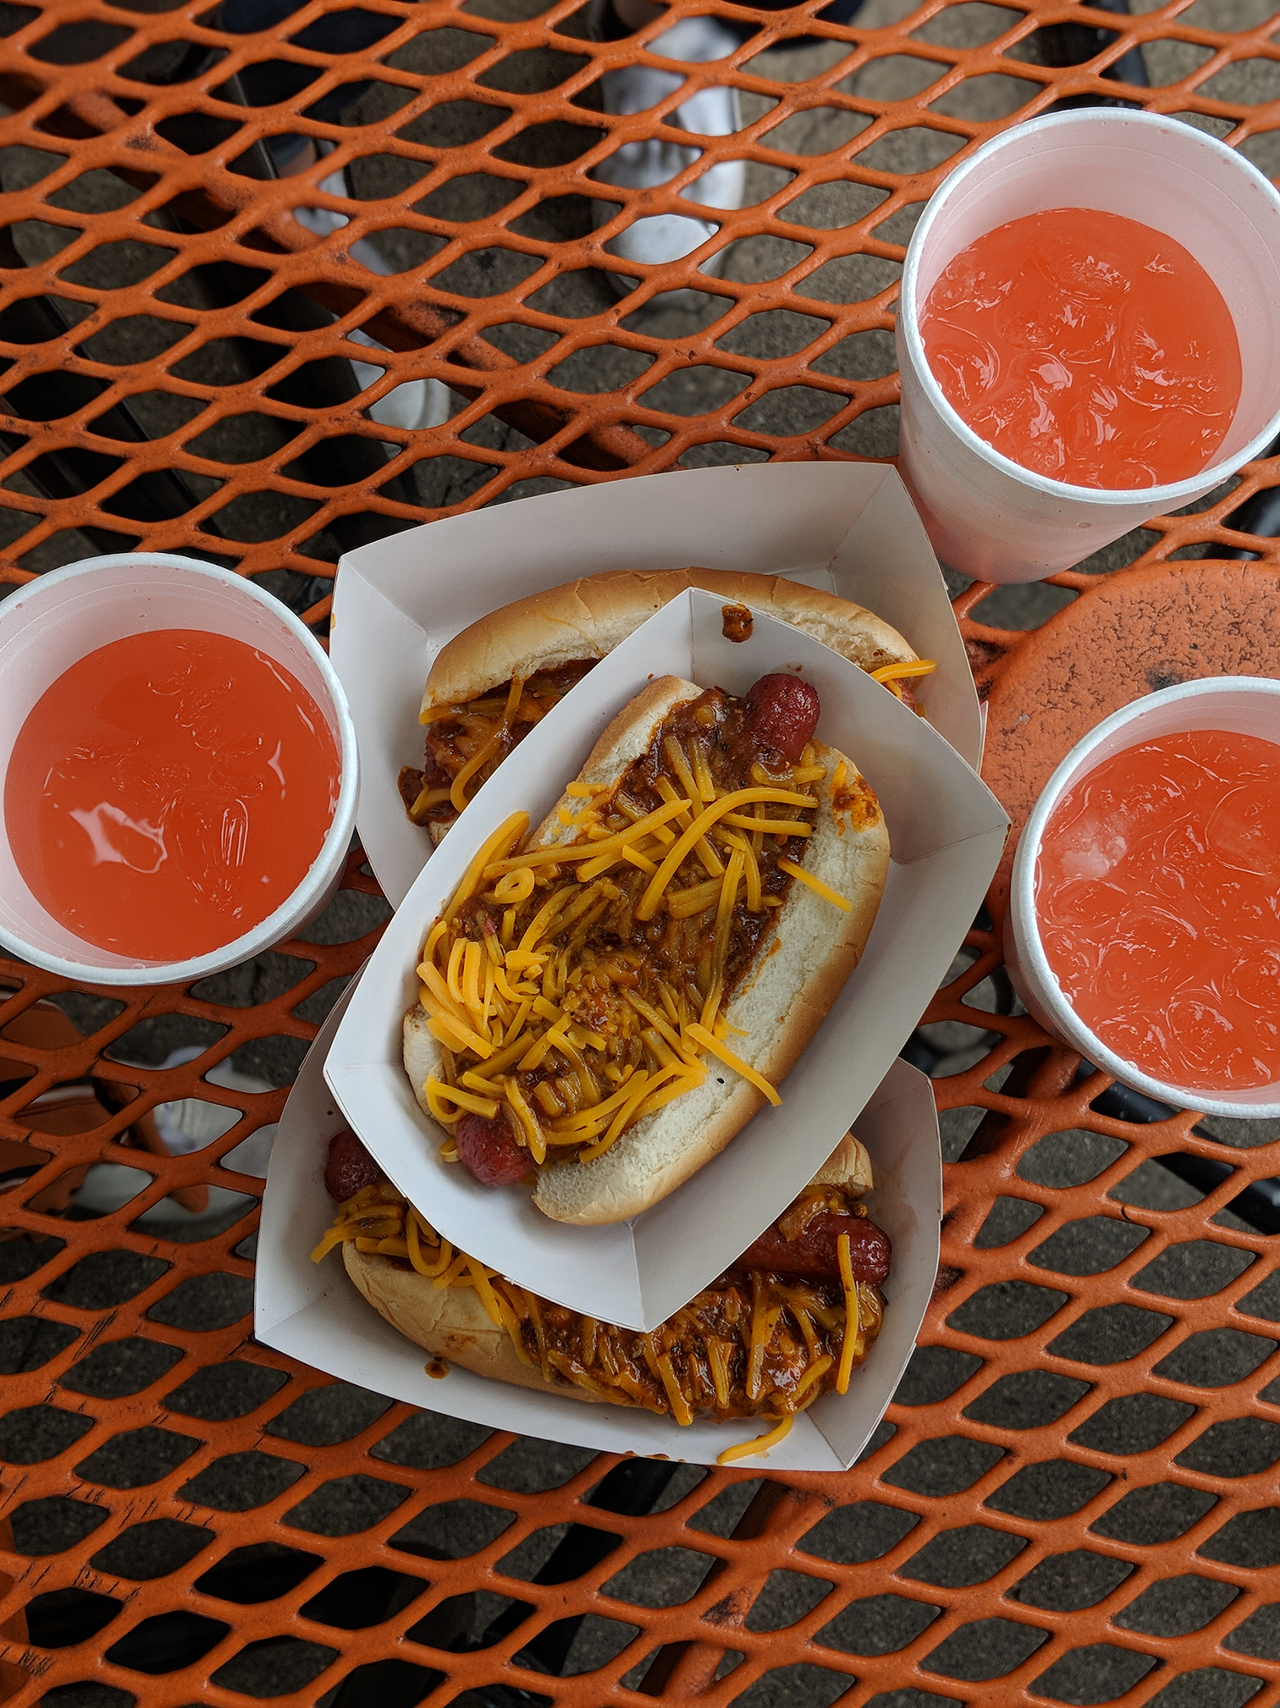 Chili cheese dogs and pink lemonade from Ollie's Trolley.